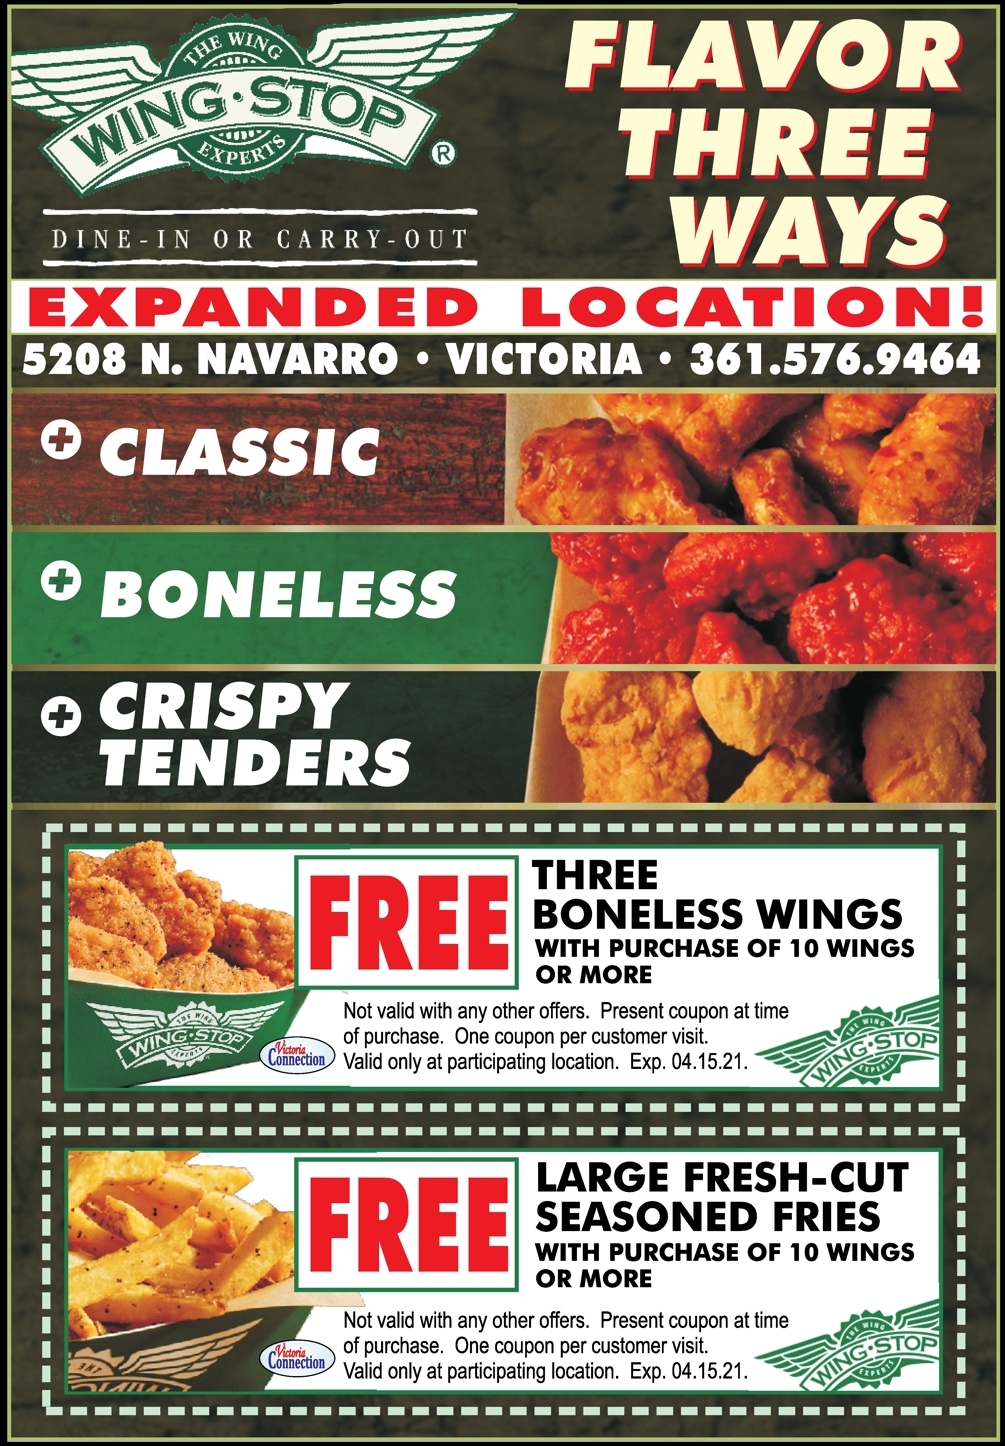 It's All About the Flavor! Get Your FREE Wings from the Wings